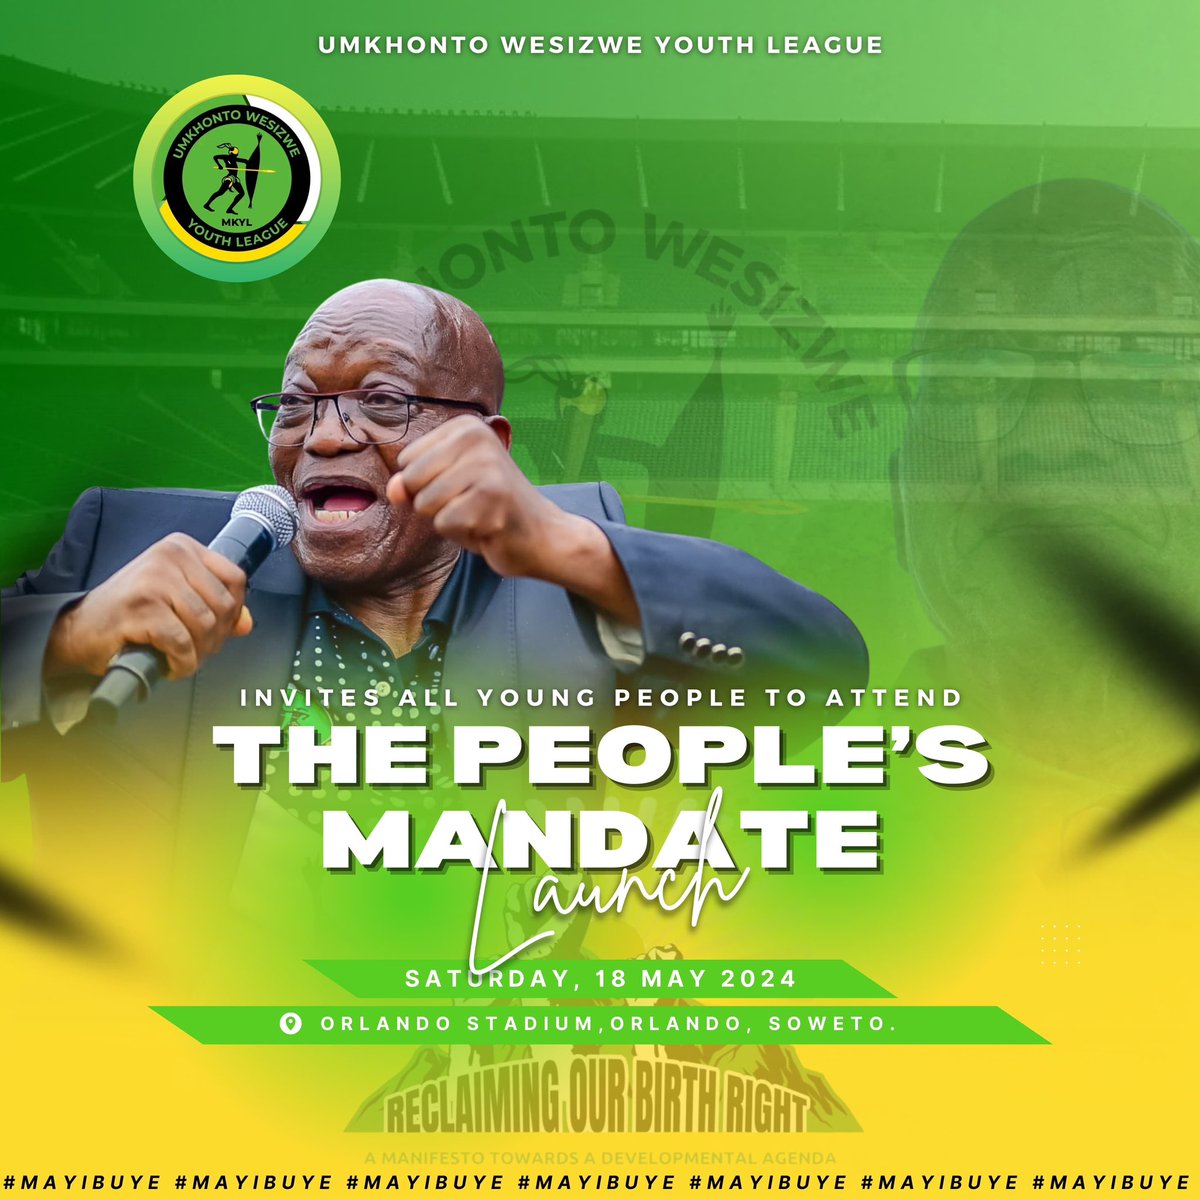 Young Forces of MK Party extend the invite to all young people to join us on the 18th May 2024 as we launch The People’s Mandate!💚
Come one, come all!

#Mayibuye
#WozaMkhontoSikhulume
#VoteMK2024
#WozaMkhontoSikhulule